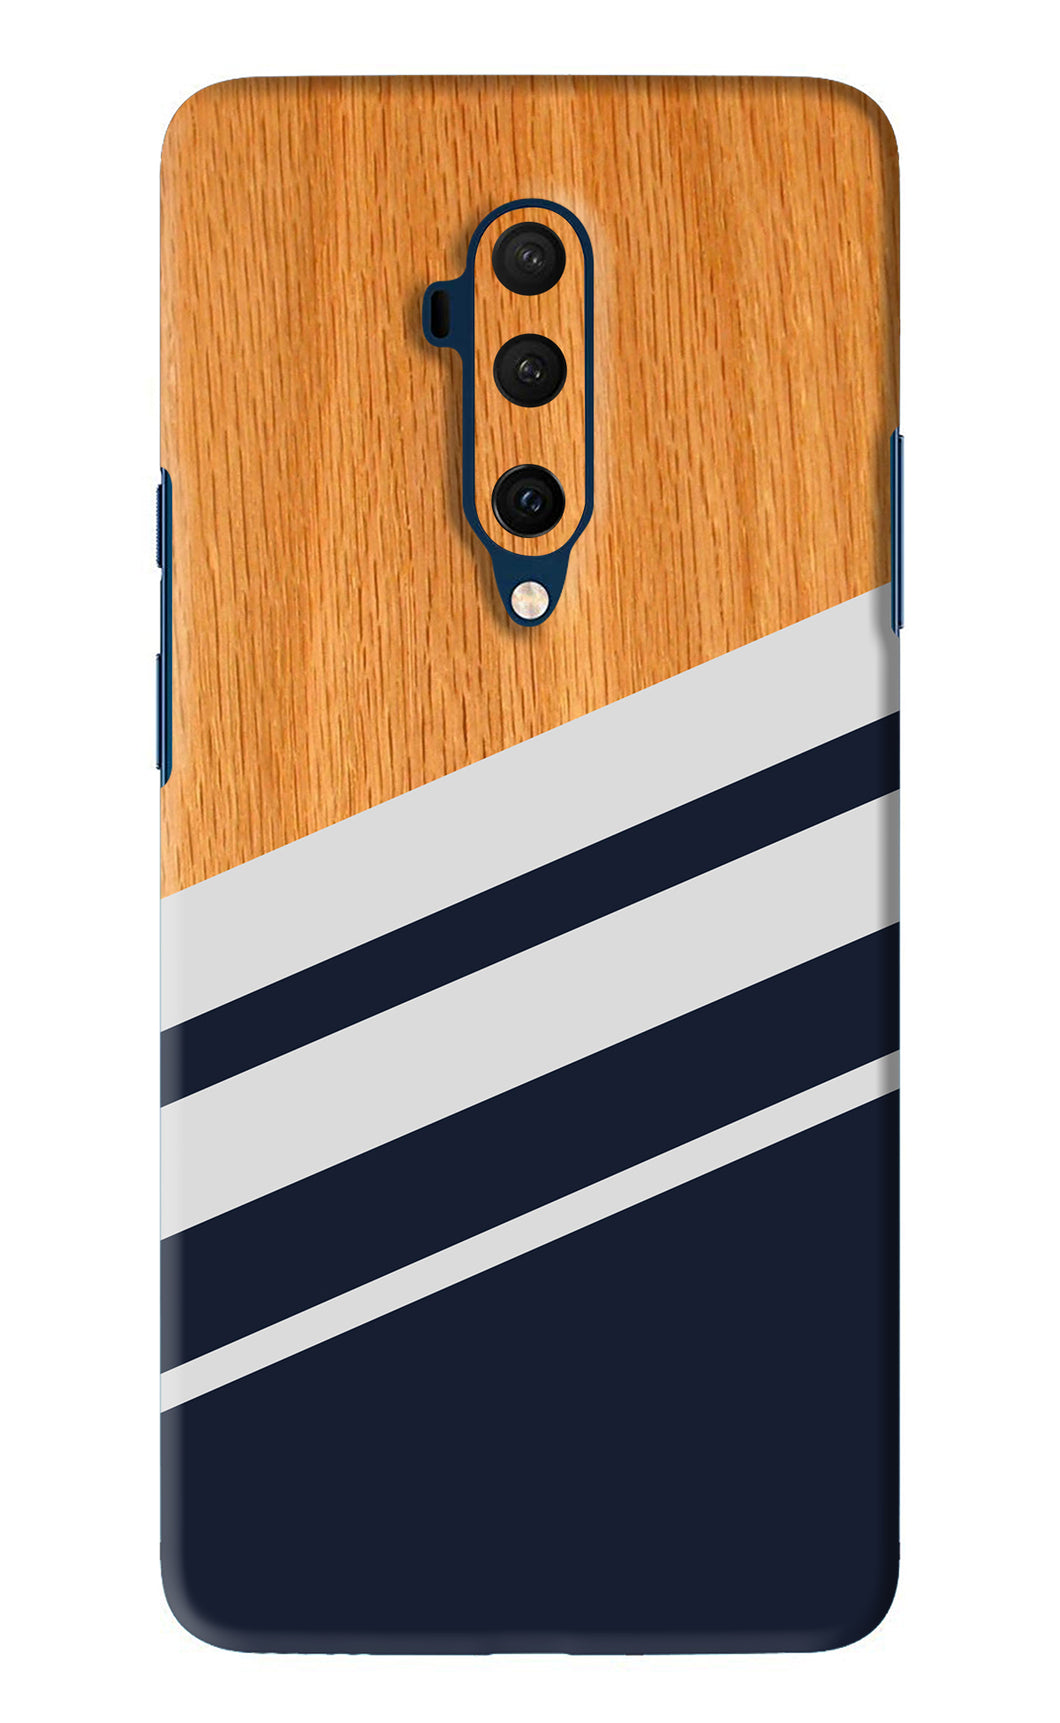 Black And White Wooden OnePlus 7T Pro Back Skin Wrap